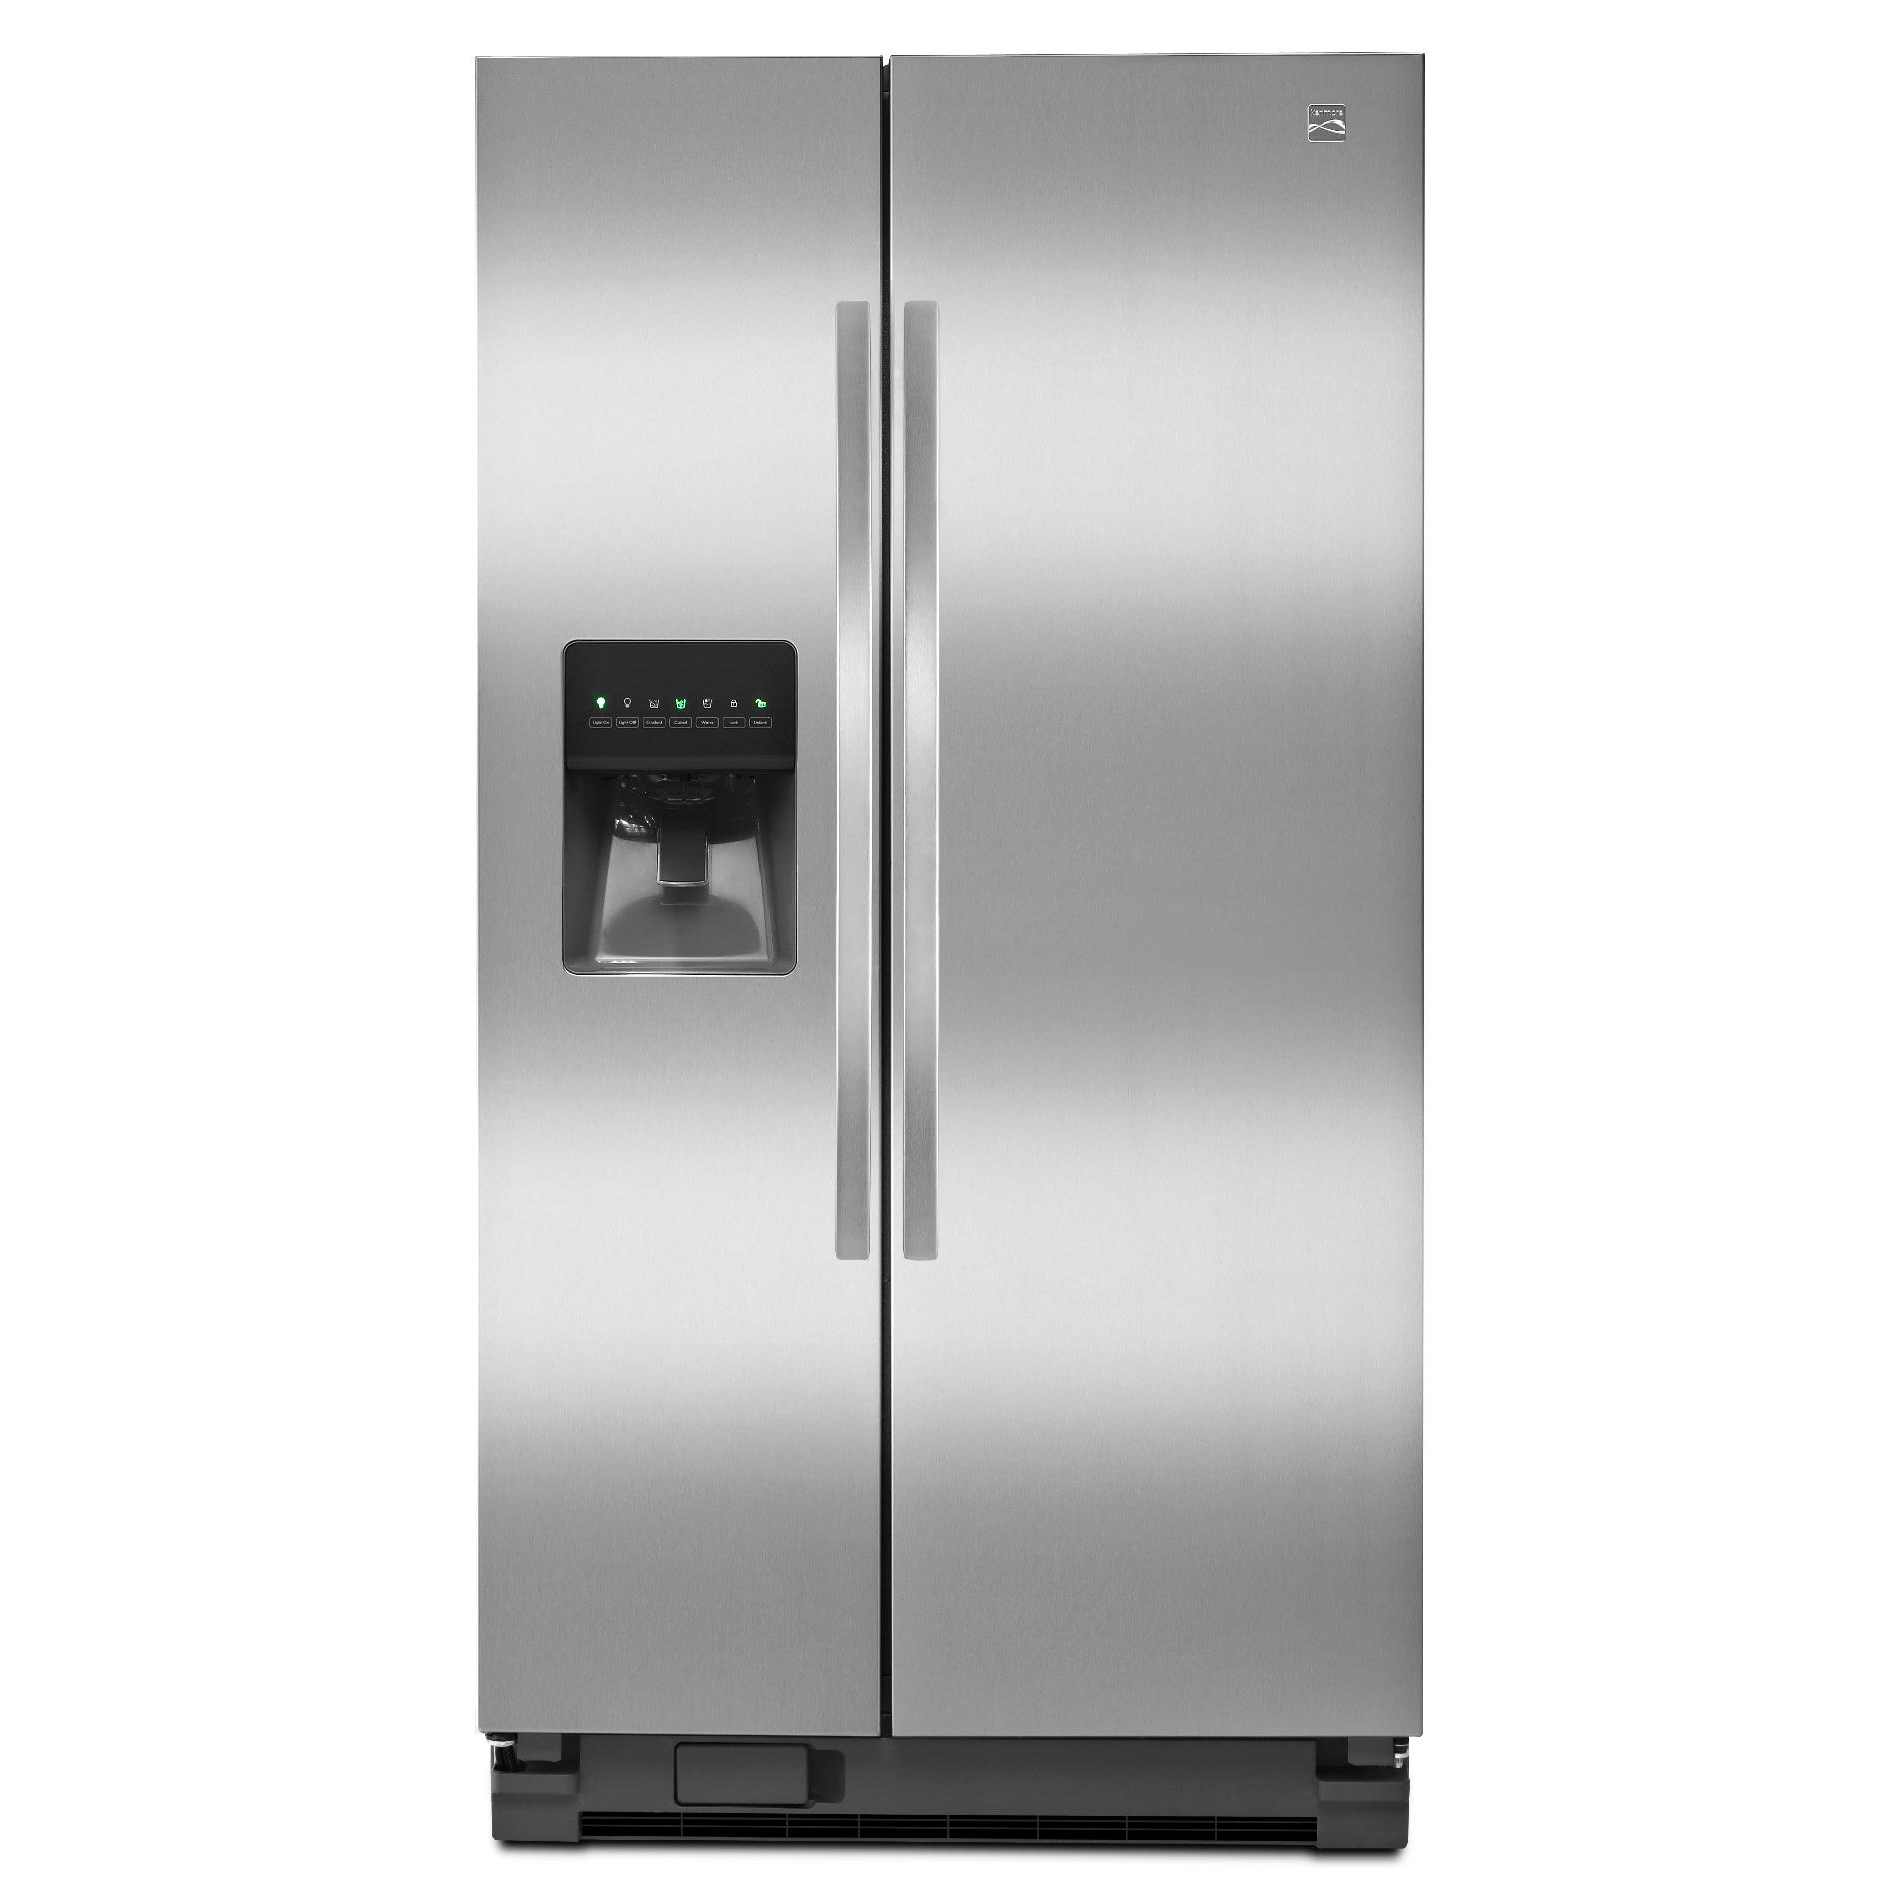 UPC 883049265674 product image for 25 cu. ft. Side-by-Side Refrigerator - Stainless Steel | upcitemdb.com